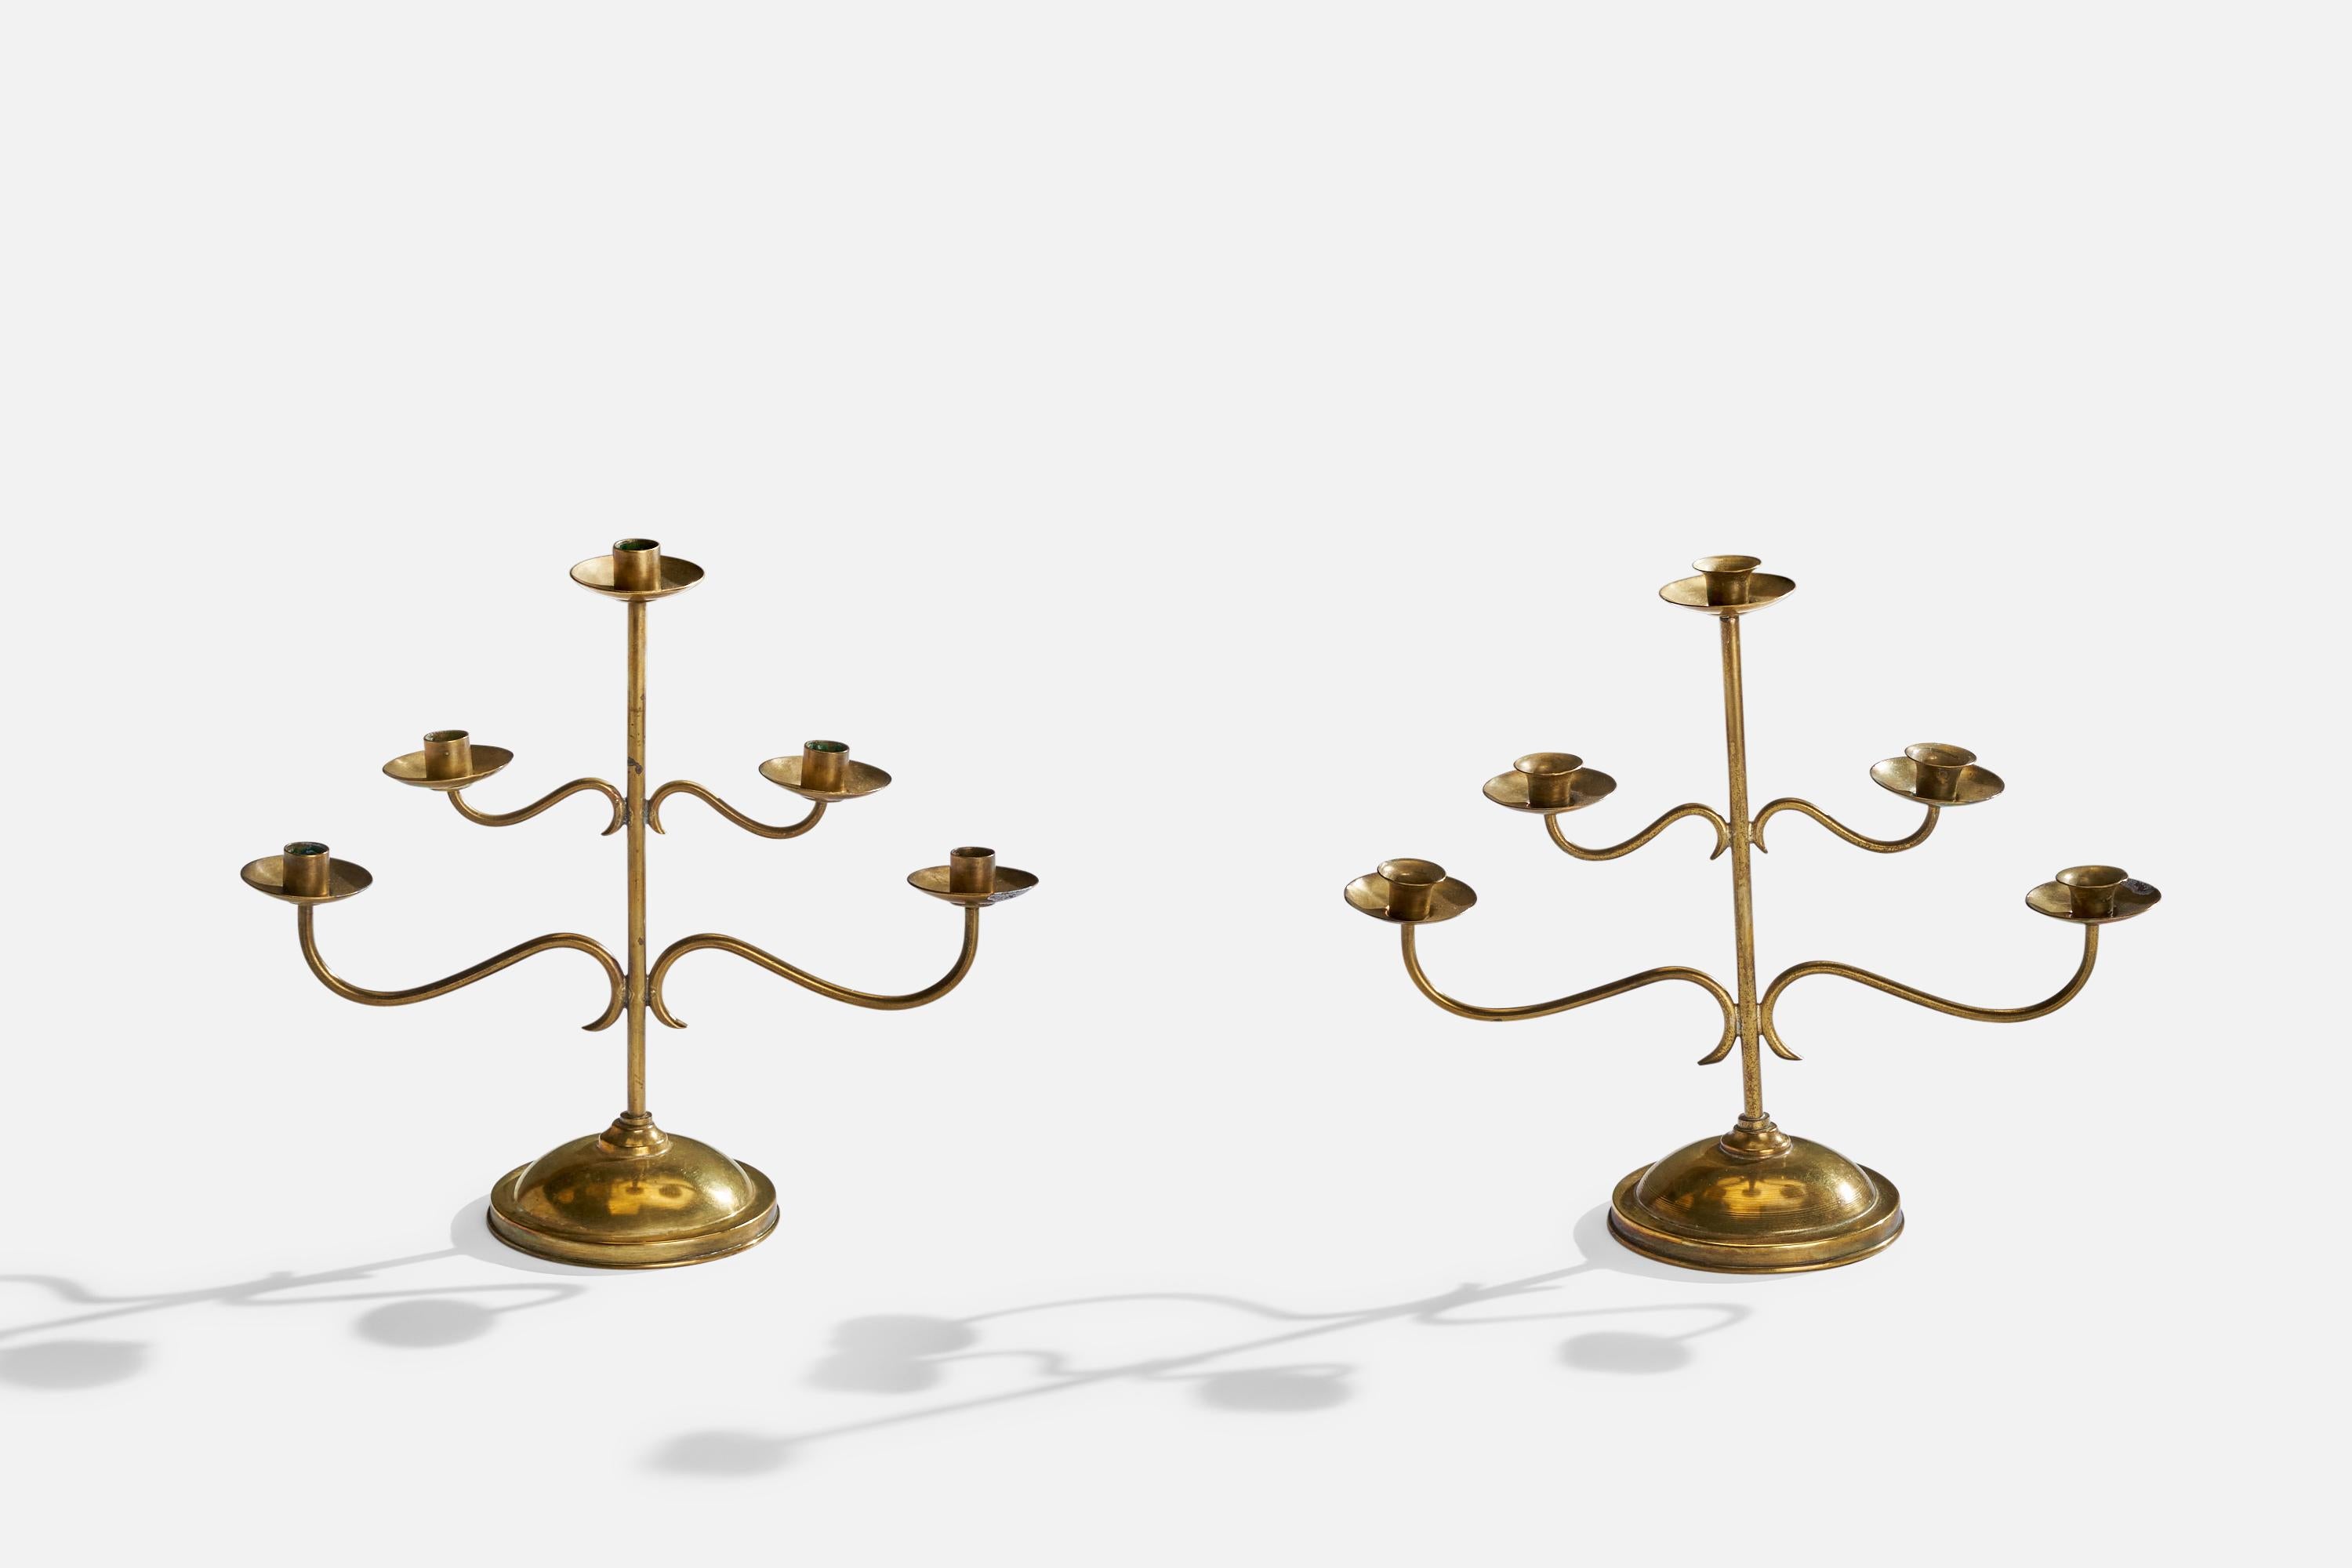 A pair of brass candelabras designed and produced in Sweden, c. 1940s.

Hold .75” candles

Near identical pair, please note difference to shape of nozzles.